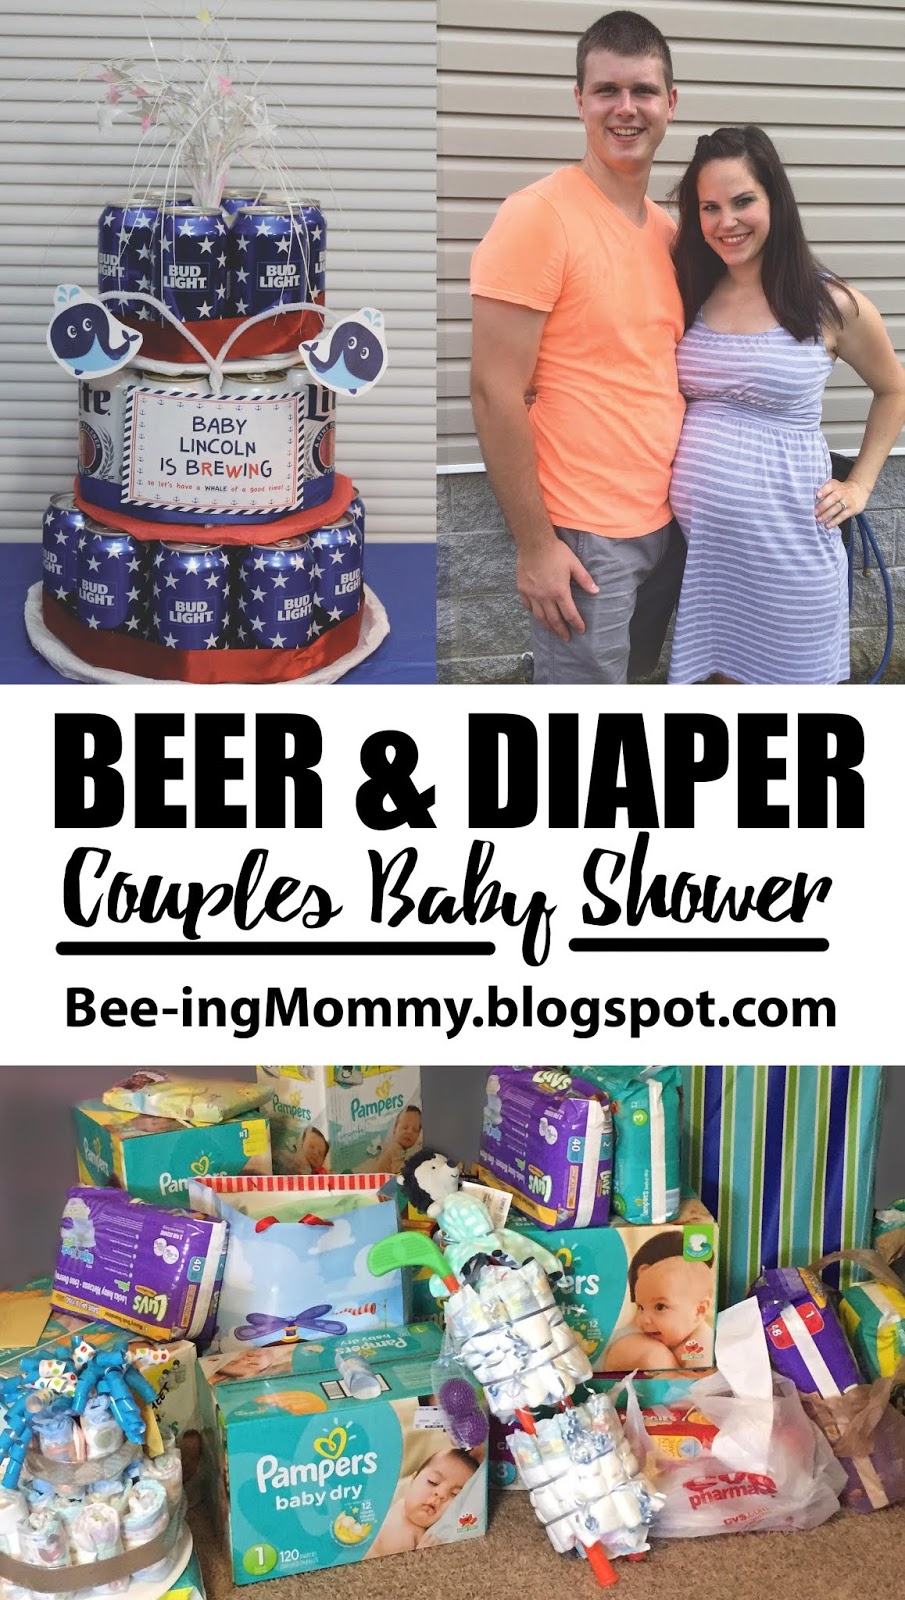 couples-baby-shower-diaper-beer-party